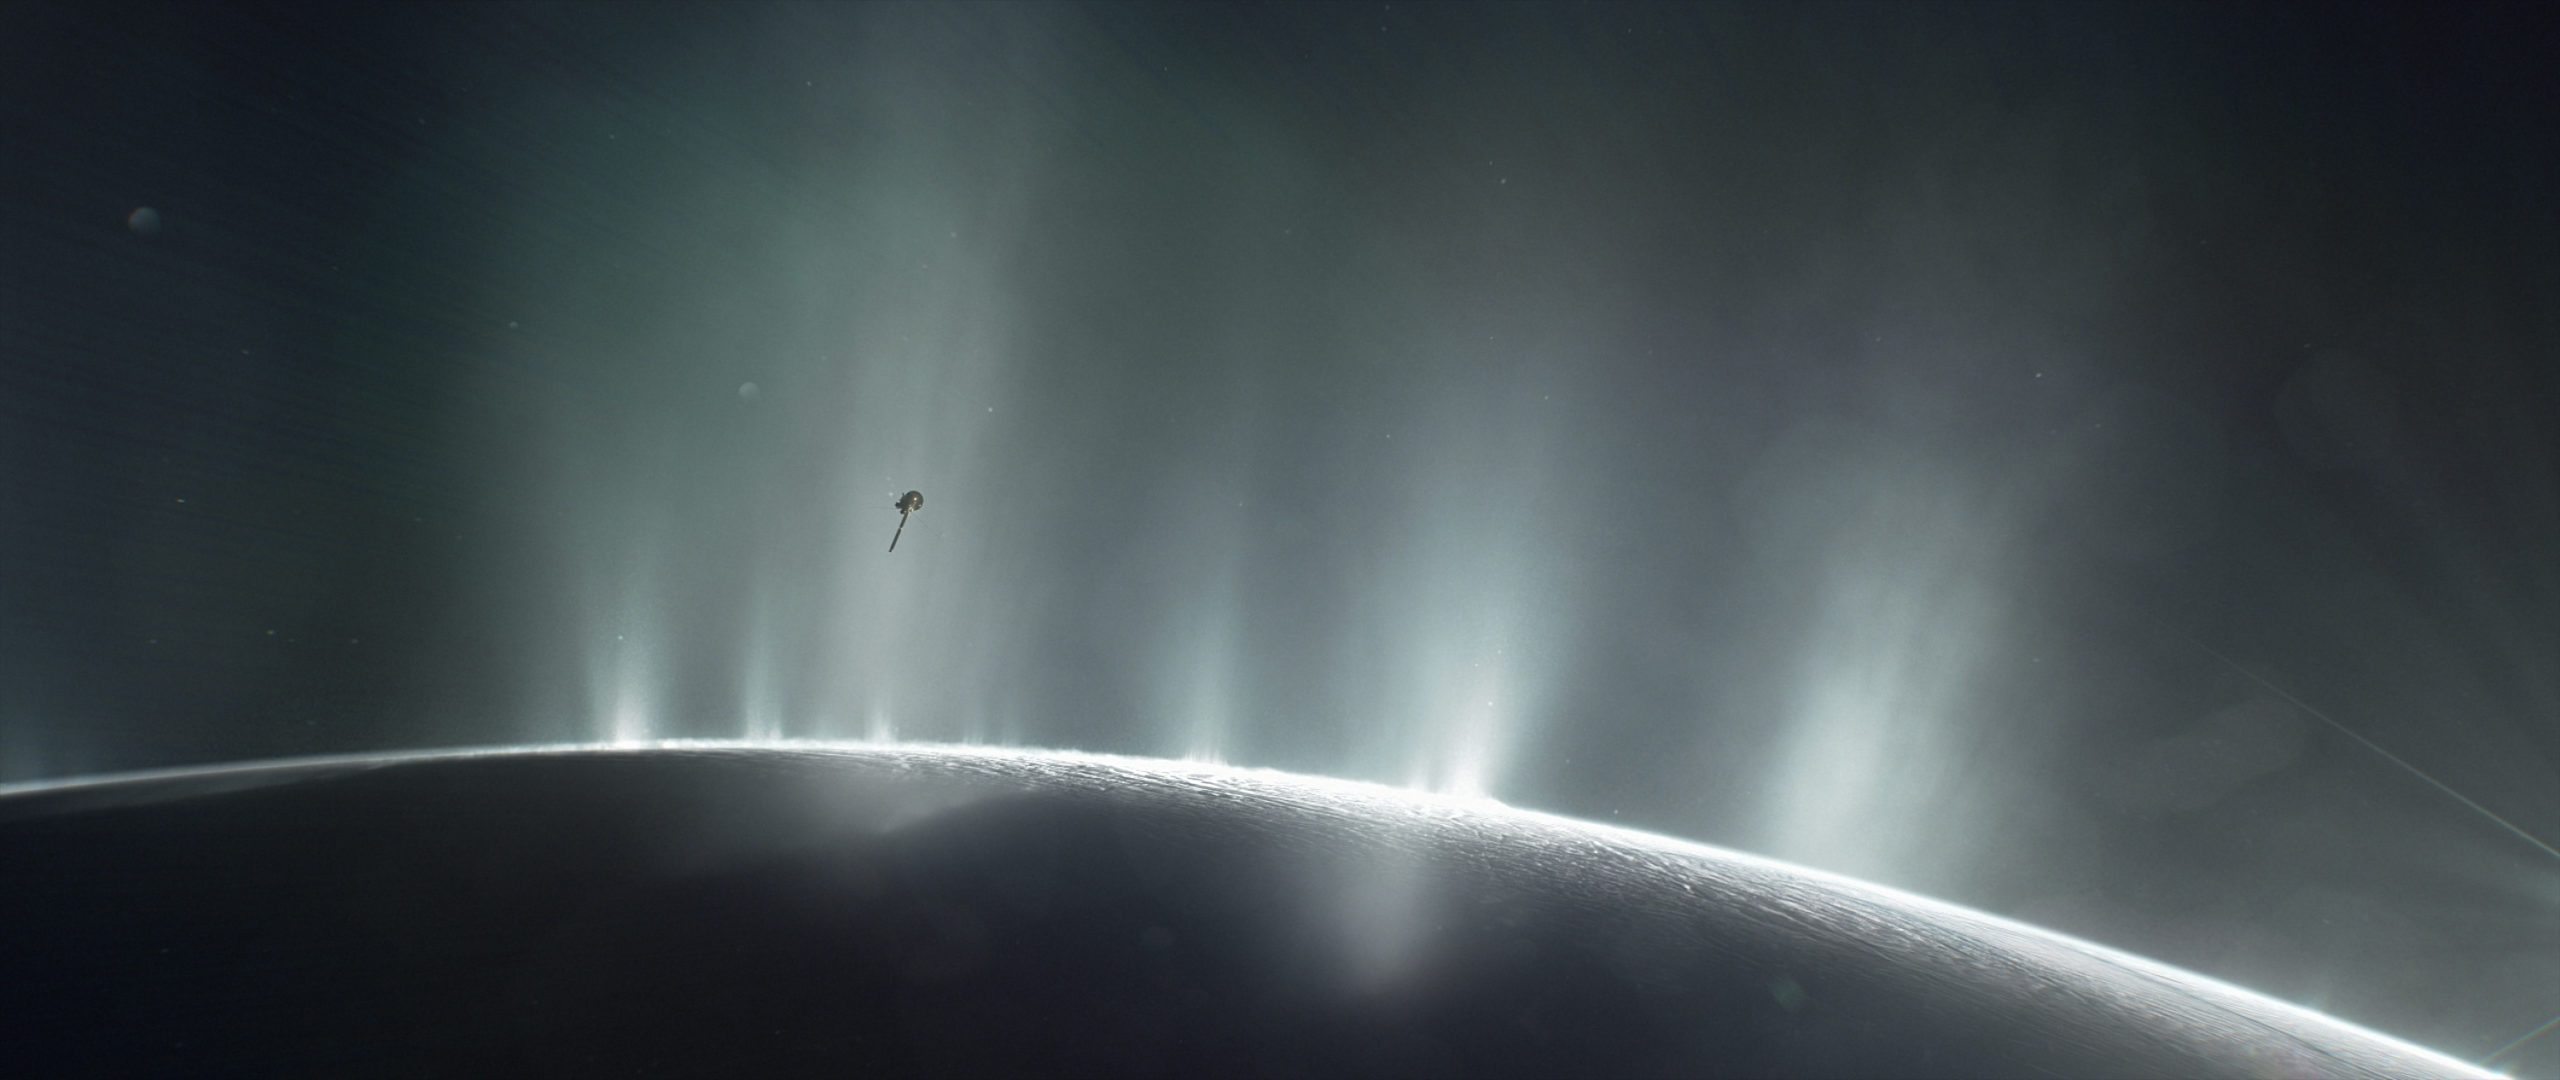 The Discovery Of Complex Organic Molecules On Saturn’s Moon Enceladus Is A Huge Deal